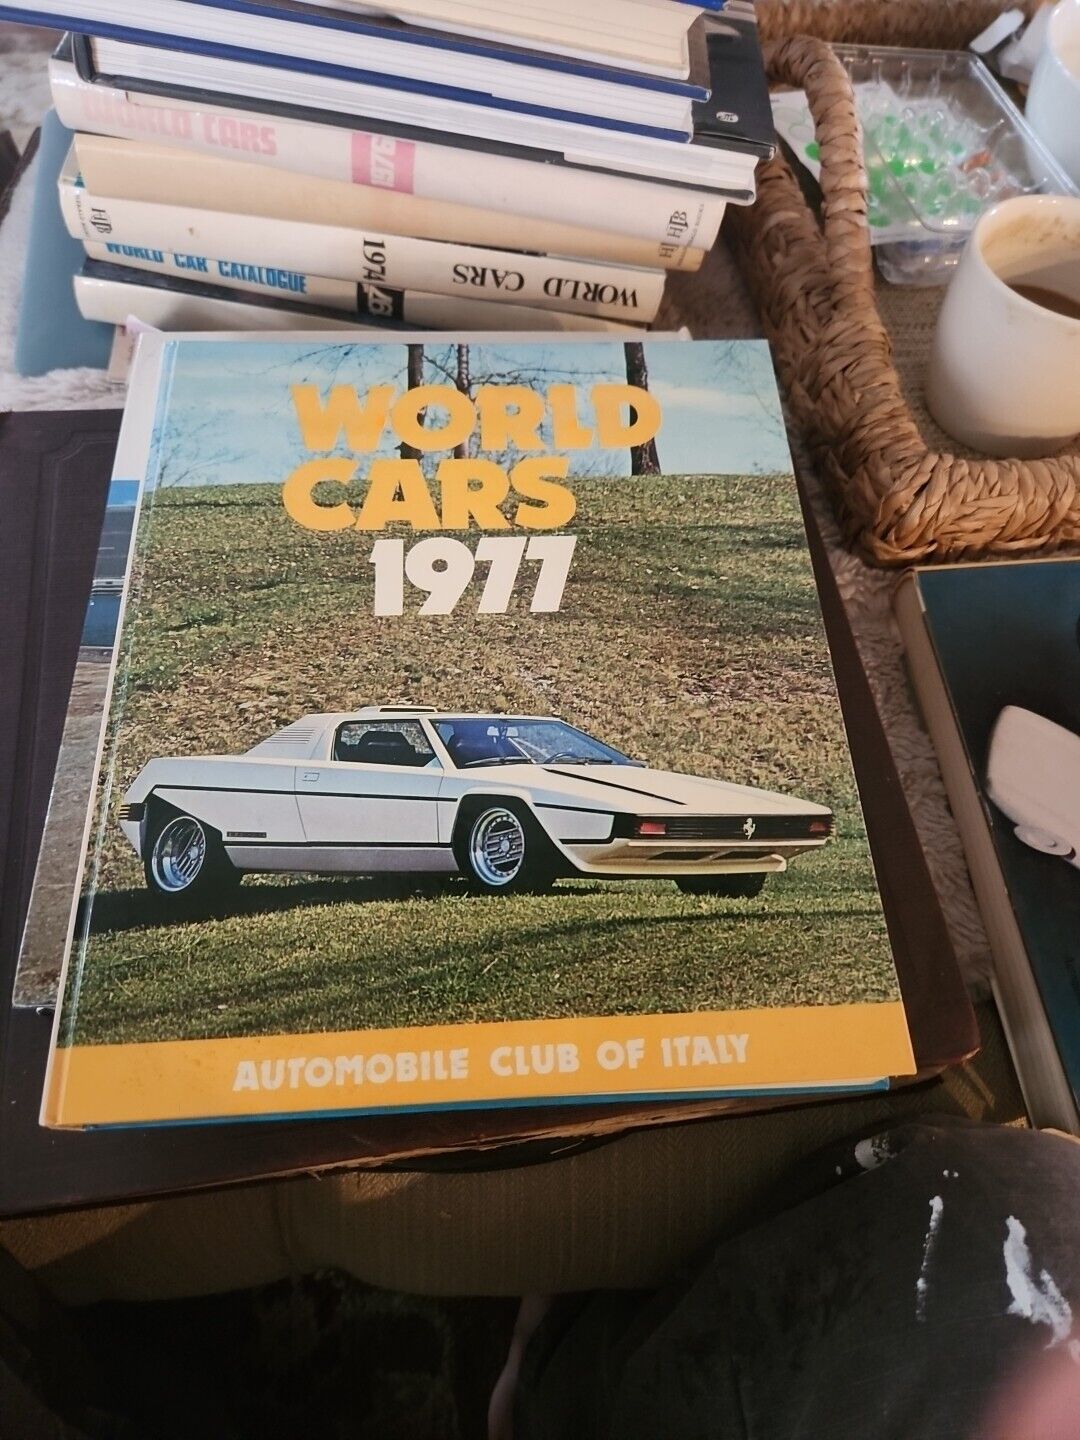 WORLD CARS 1977 AUTOMOBILE CLUB ITALY BOOK X-LIBRARY   